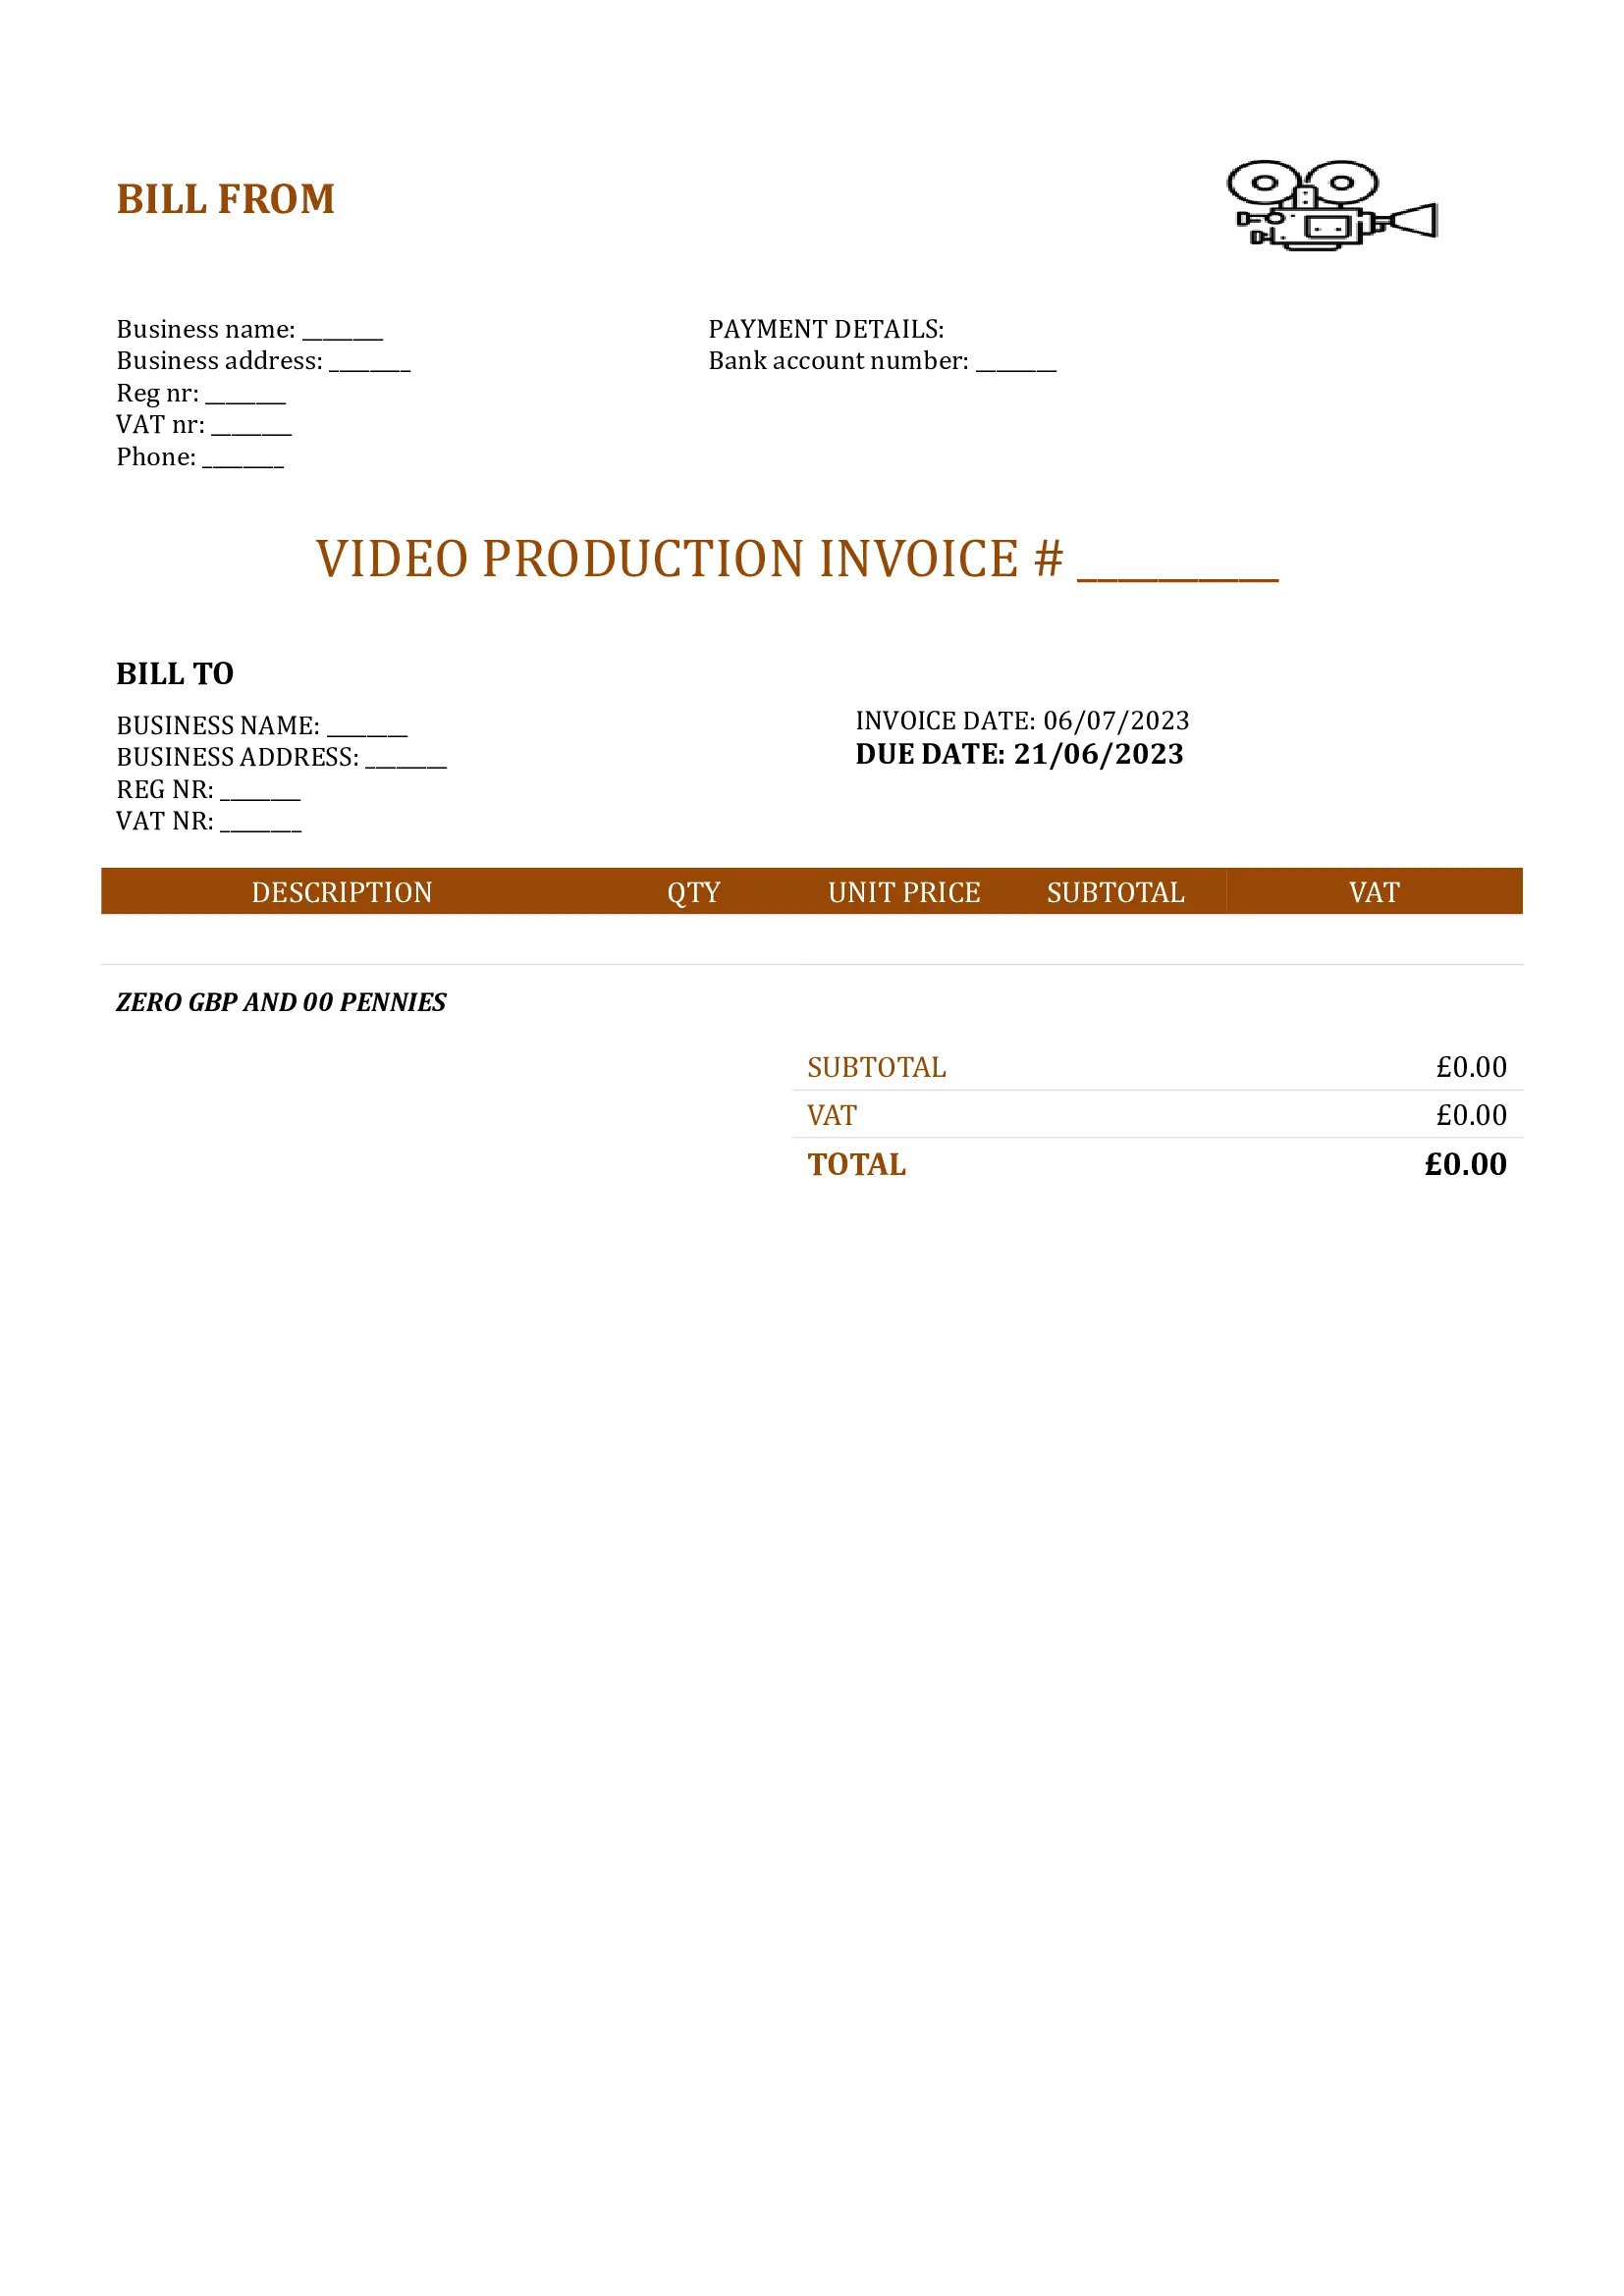 blank video production invoice template UK Word / Google docs